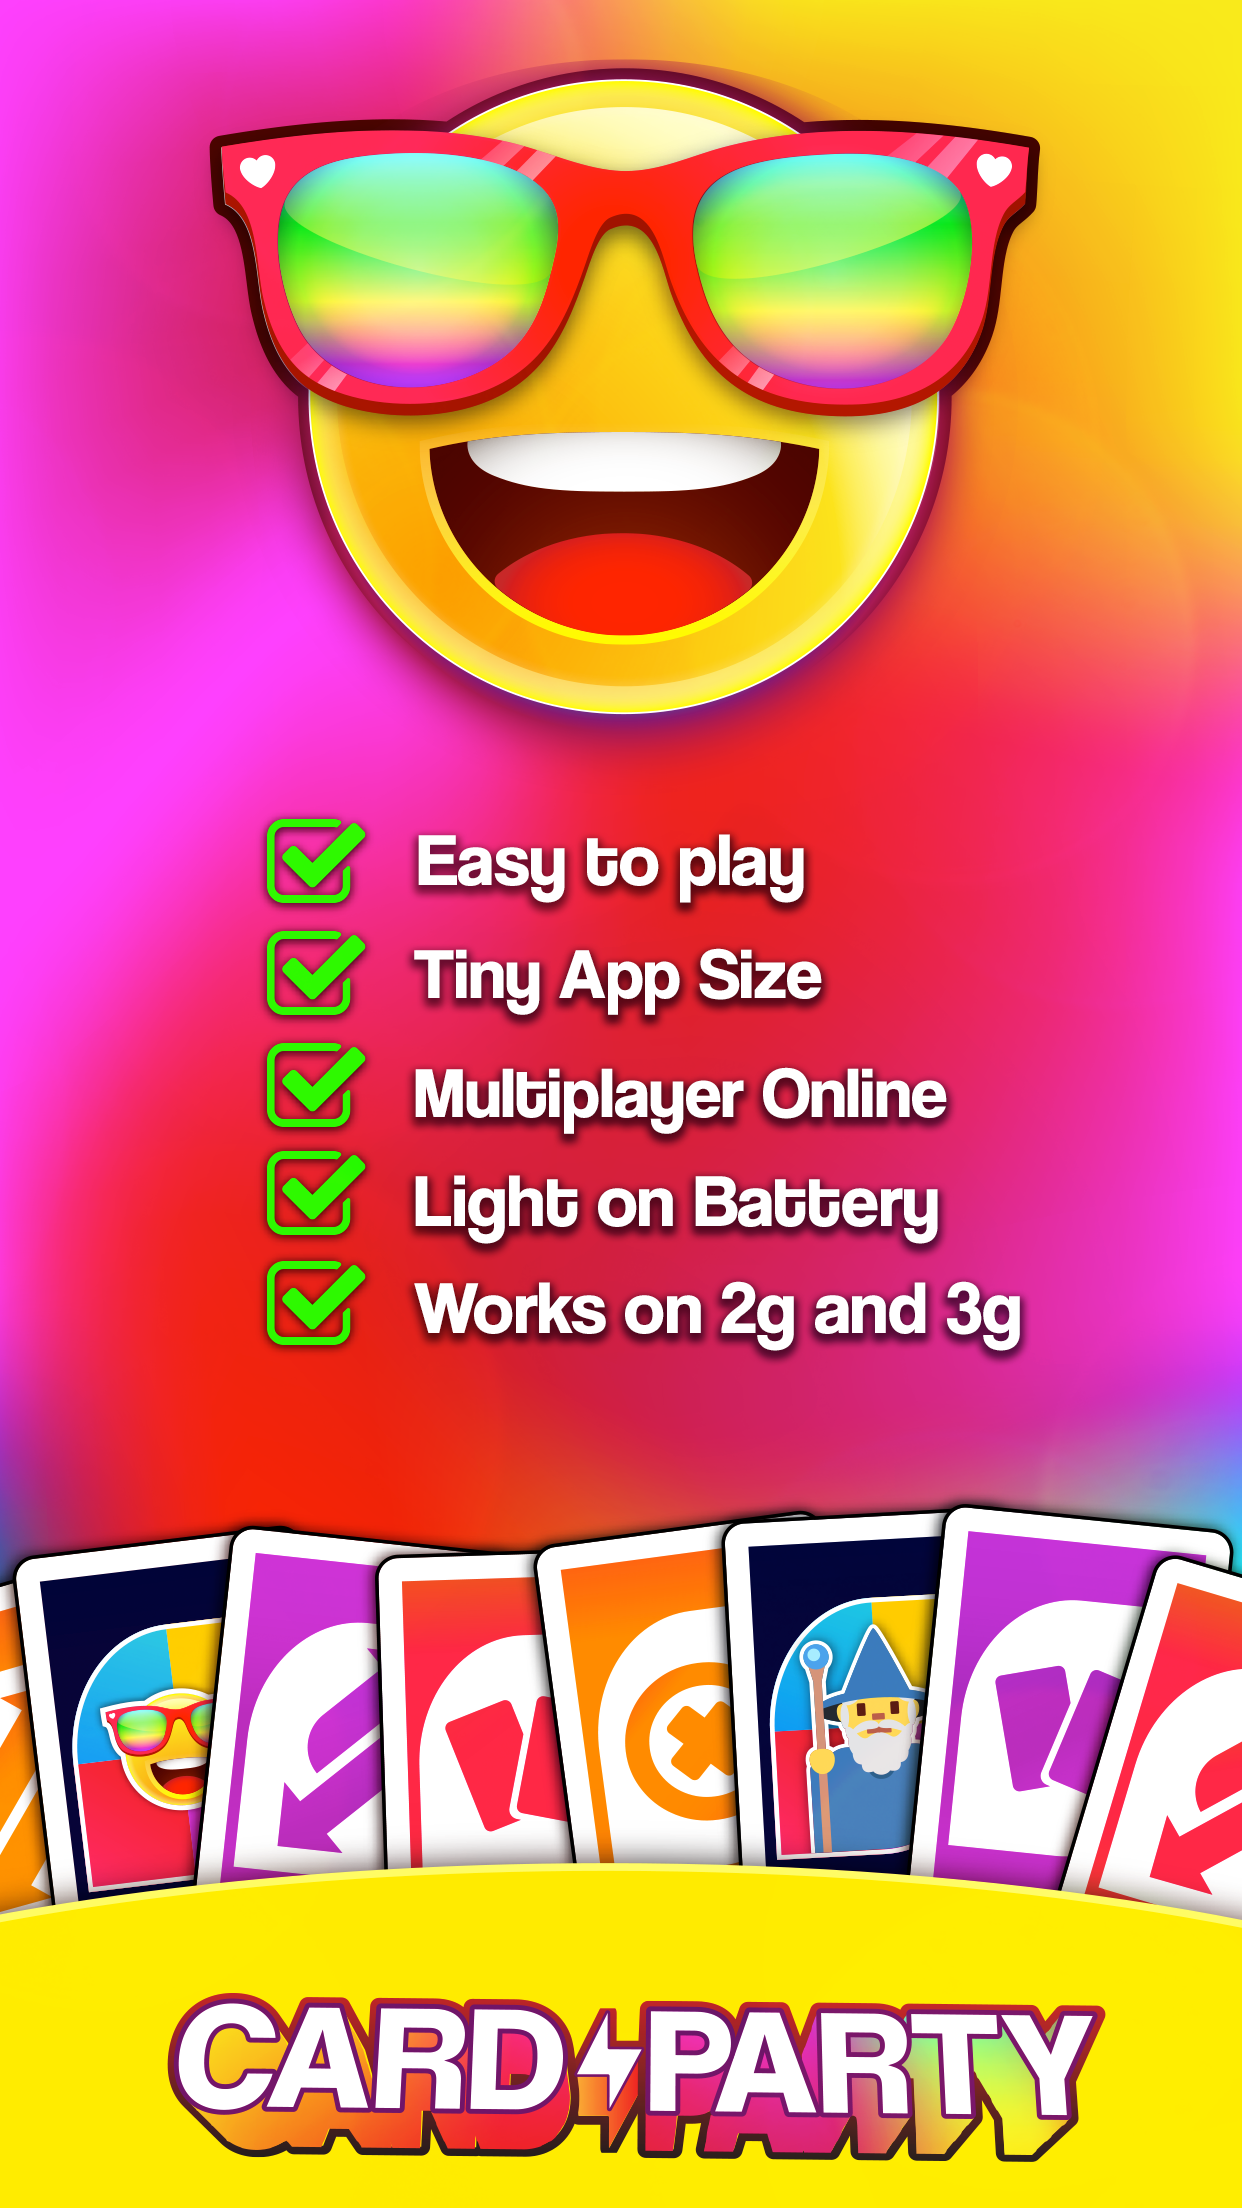 Card Party Uno Online Games With Friends Family Apk Download For Android Download Card Party Uno Online Games With Friends Family Apk Latest Version Apkfab Com